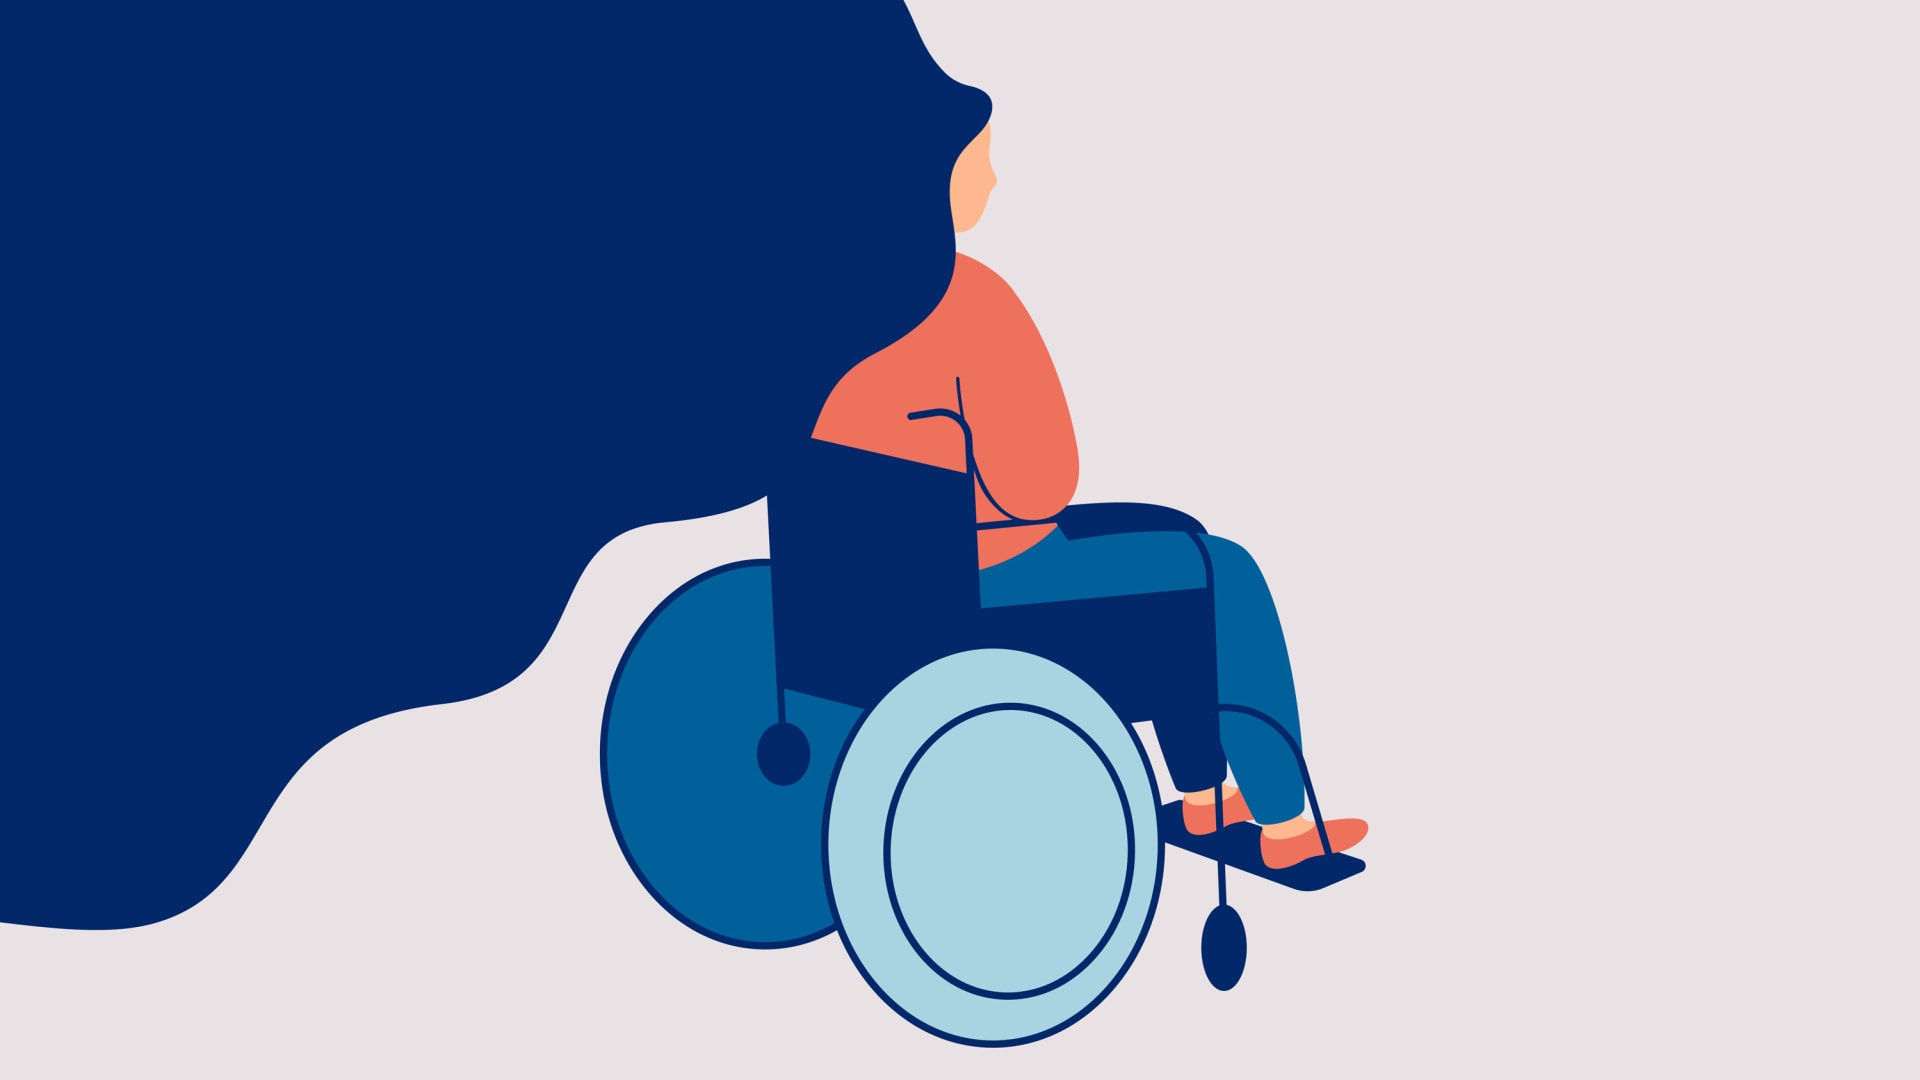 Want a More Inclusive Workplace? Great, but Don't Overlook Disabled Individuals